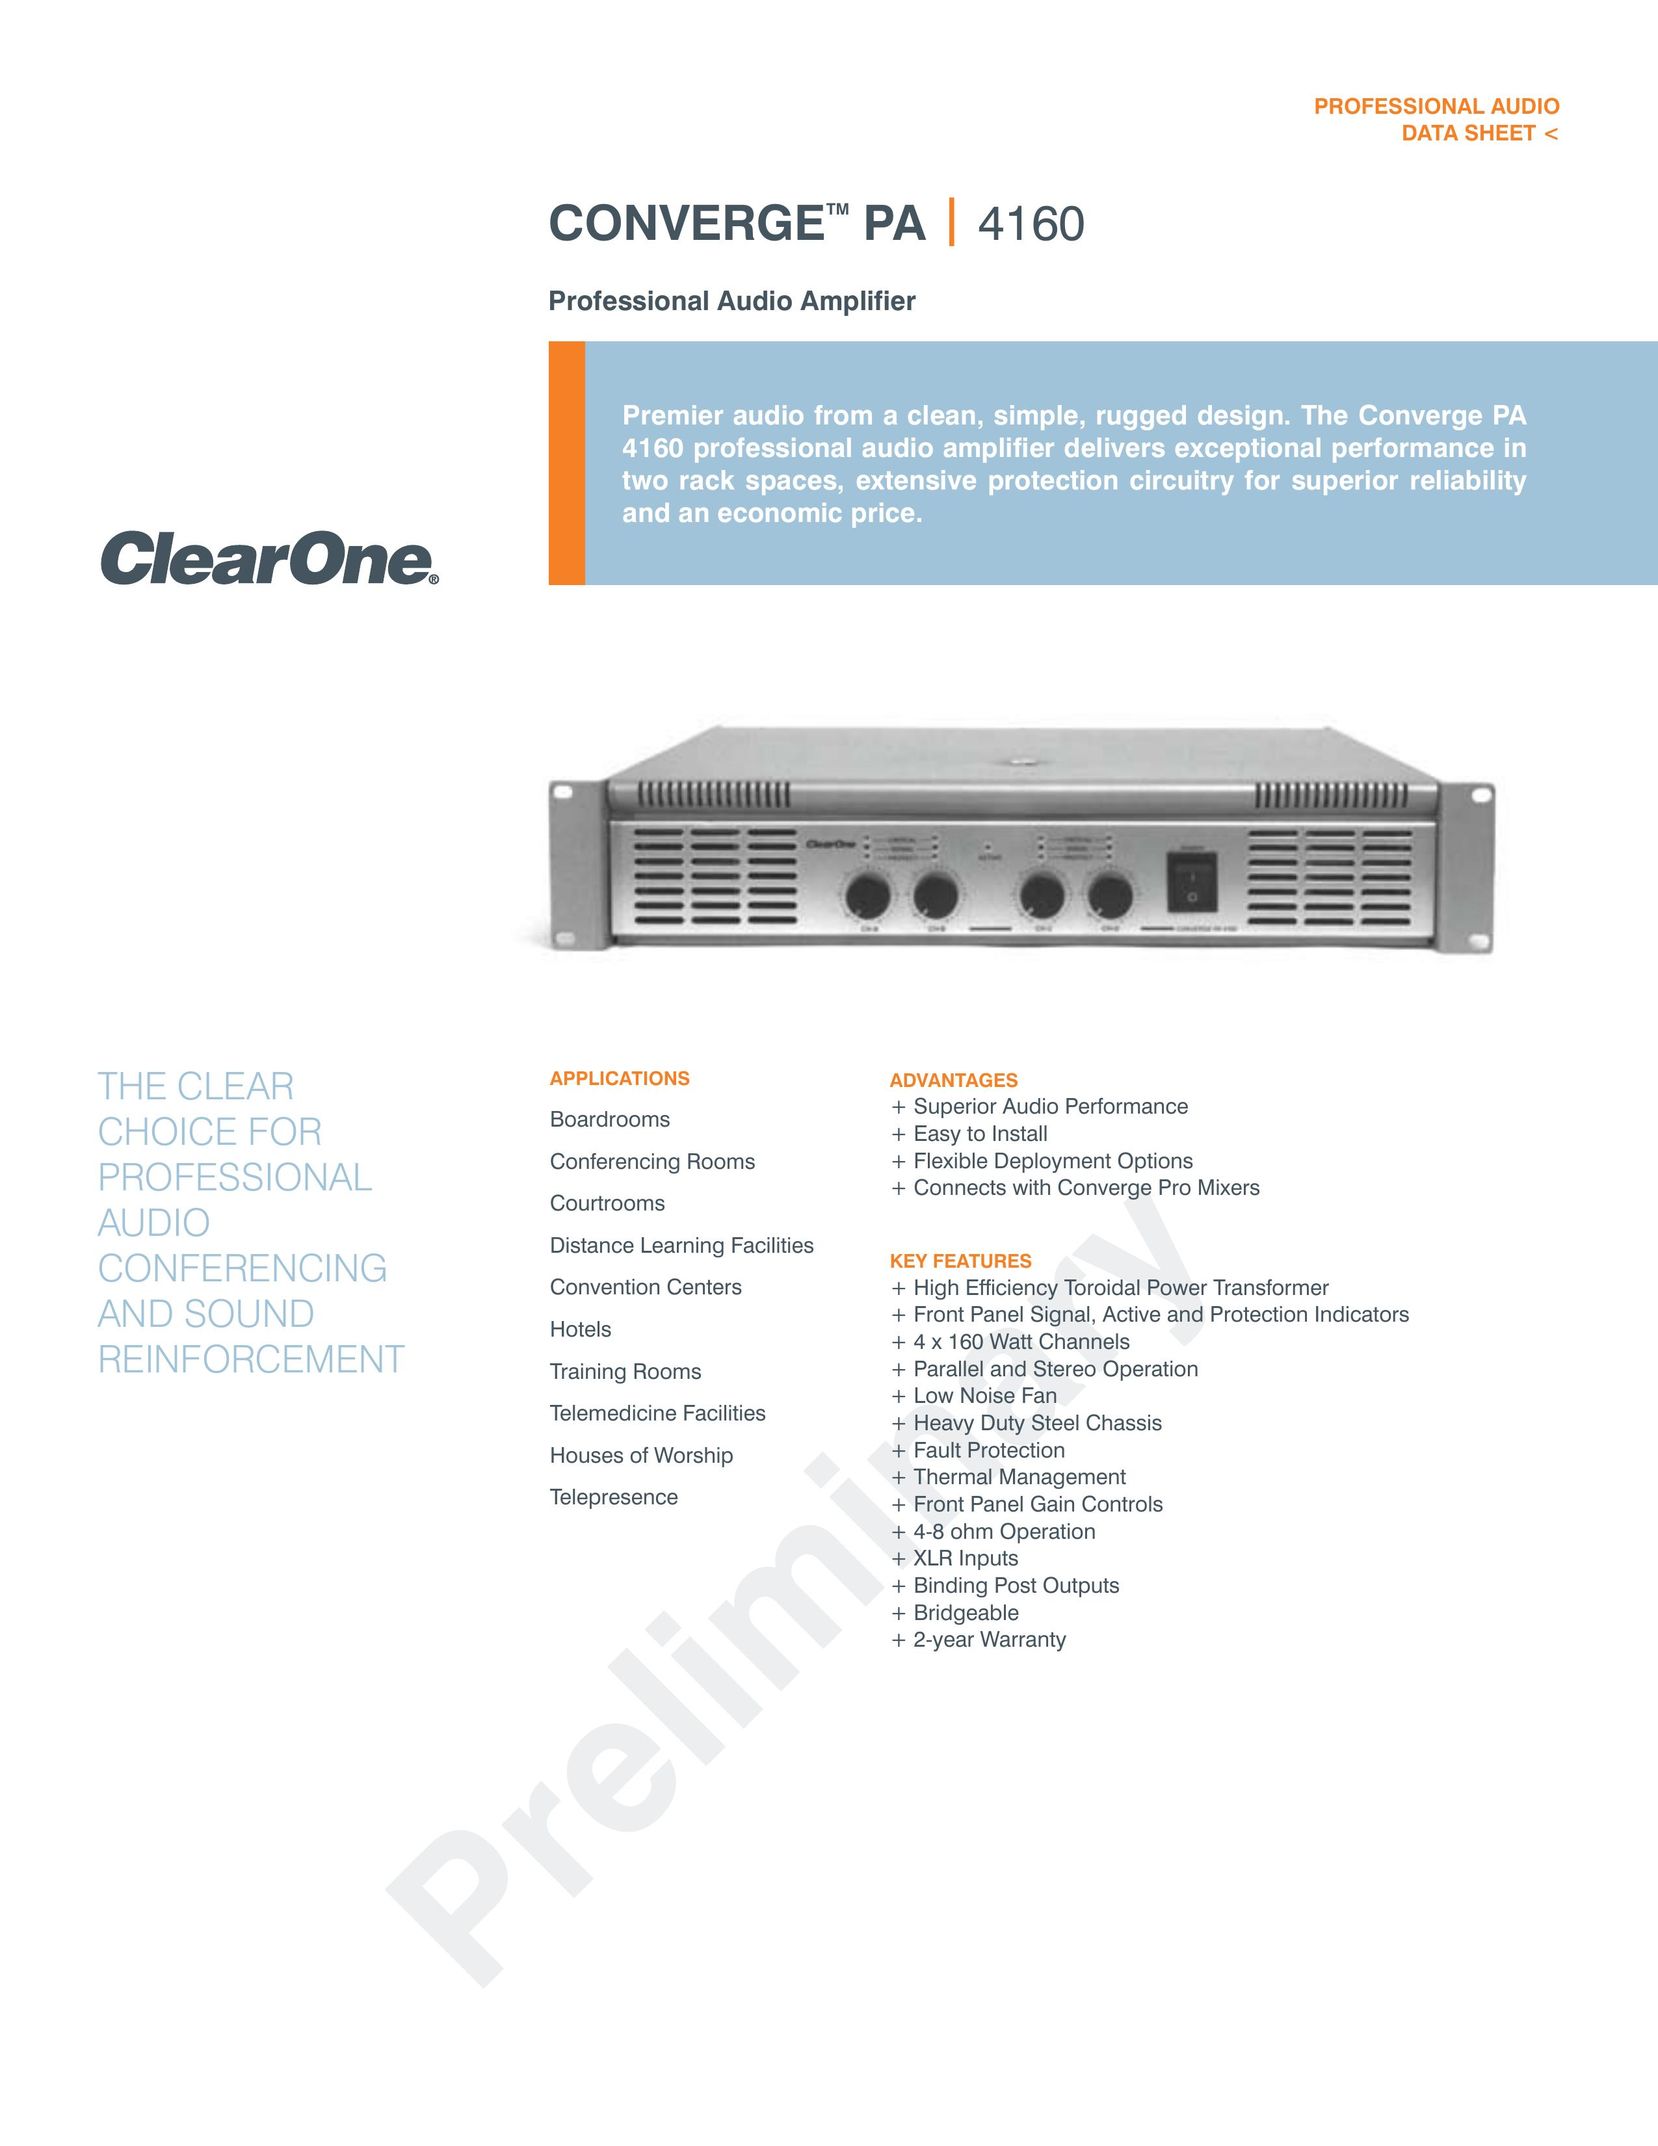 ClearOne comm PA 4160 Stereo Amplifier User Manual